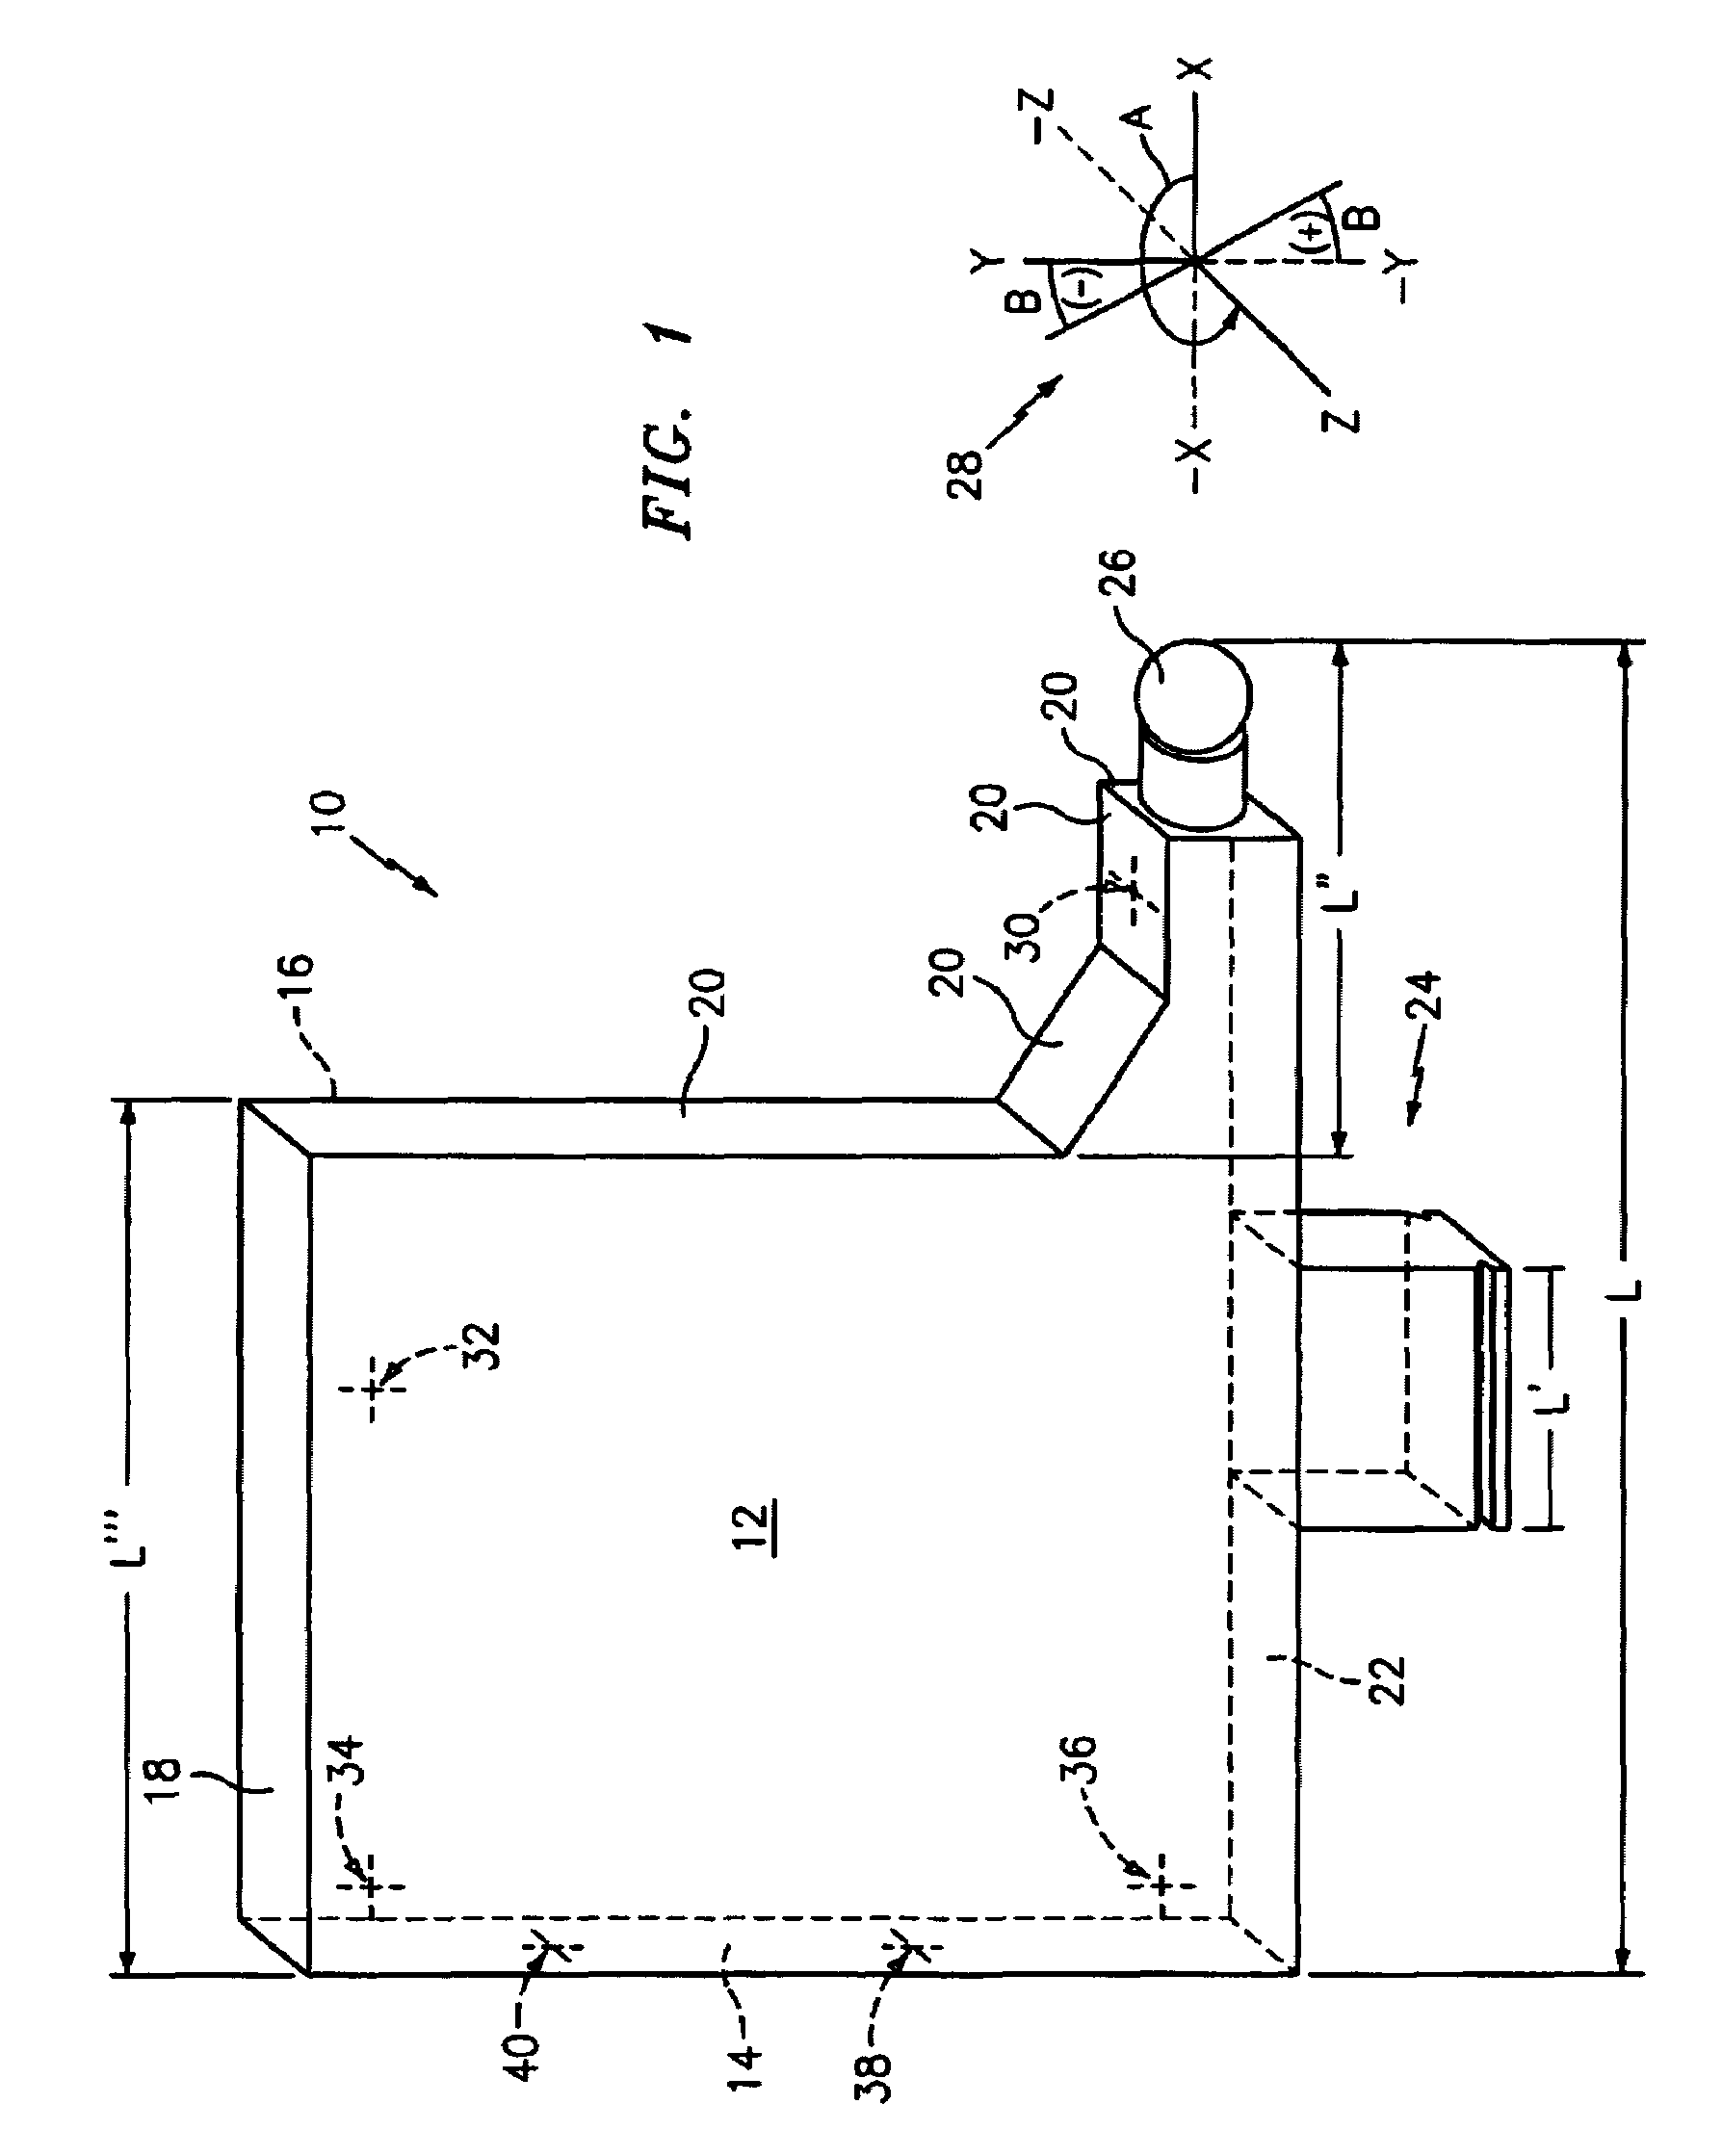 Method for certifying and calibrating multi-axis positioning coordinate measuring machines